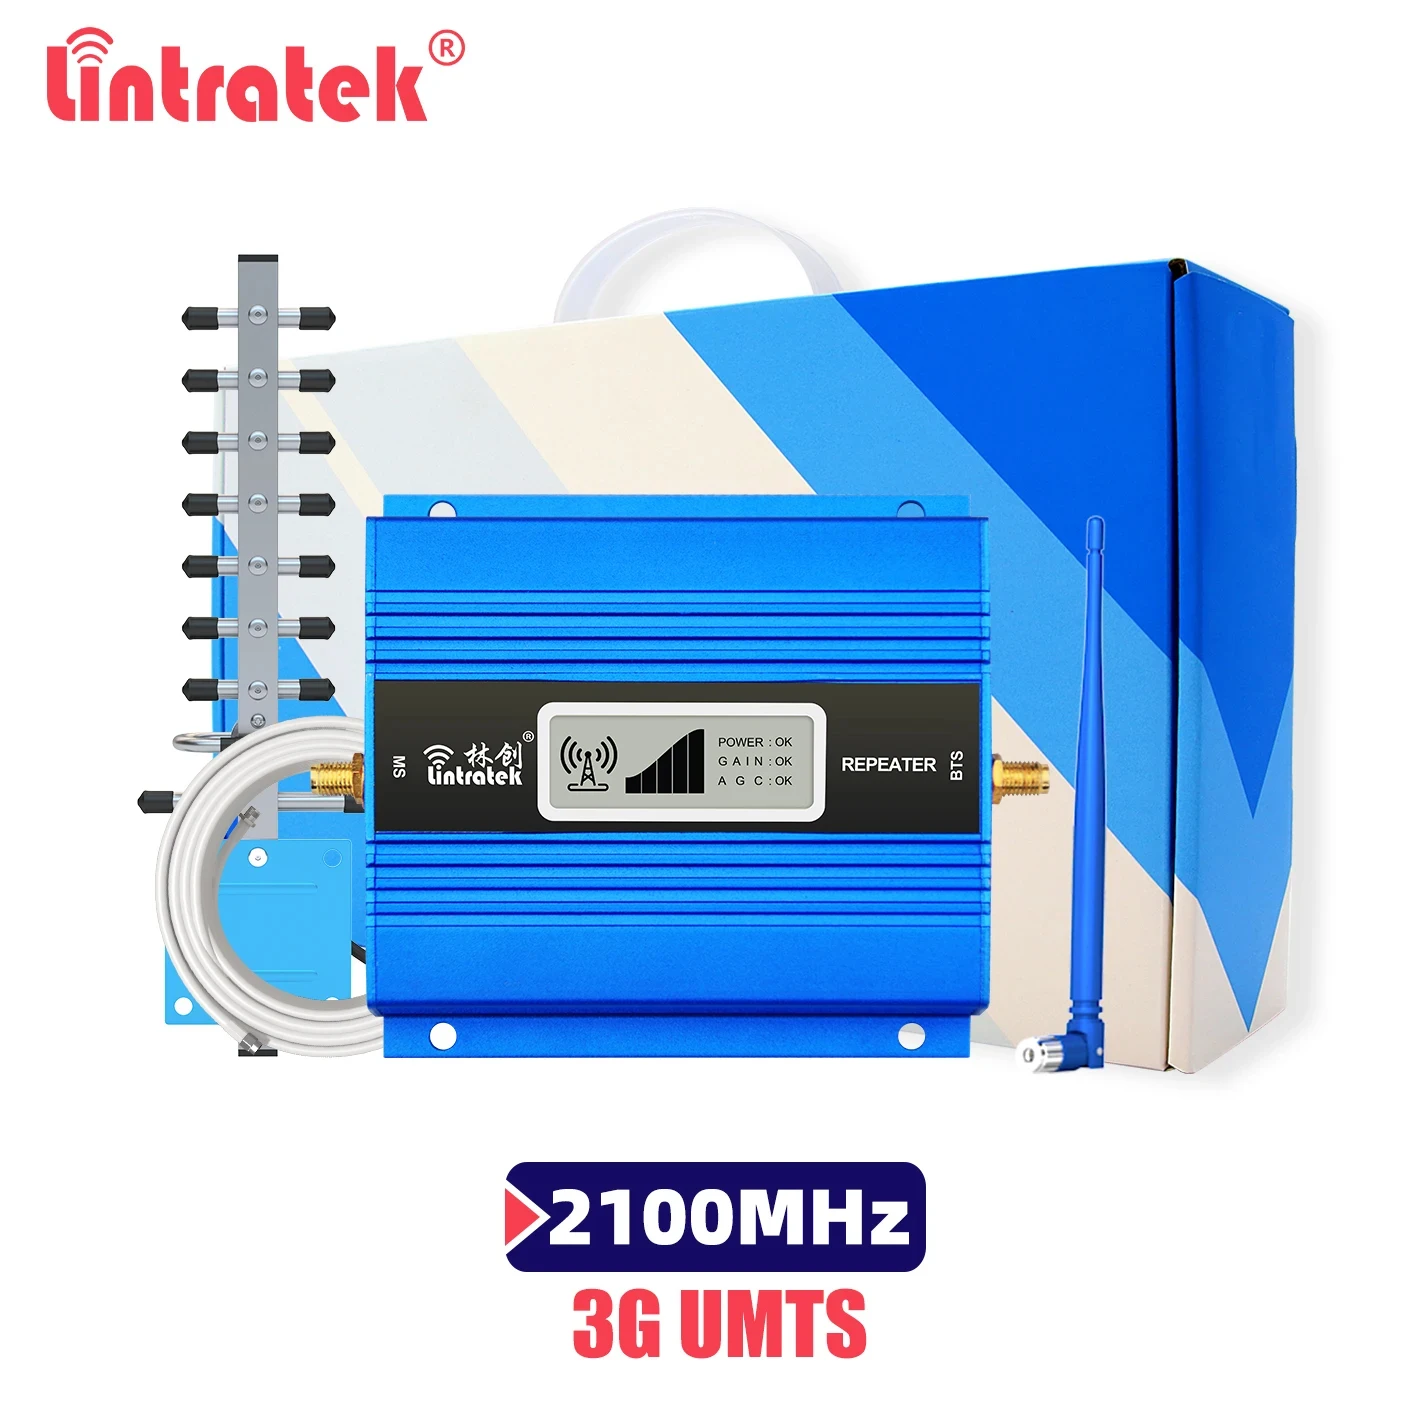 

Lintratek WCDMA 2100MHz Signal extender 3G UMTS Signal Repeater Band 1 Mobile Cellphone Booster Cellular Amplifier No Need Wlan